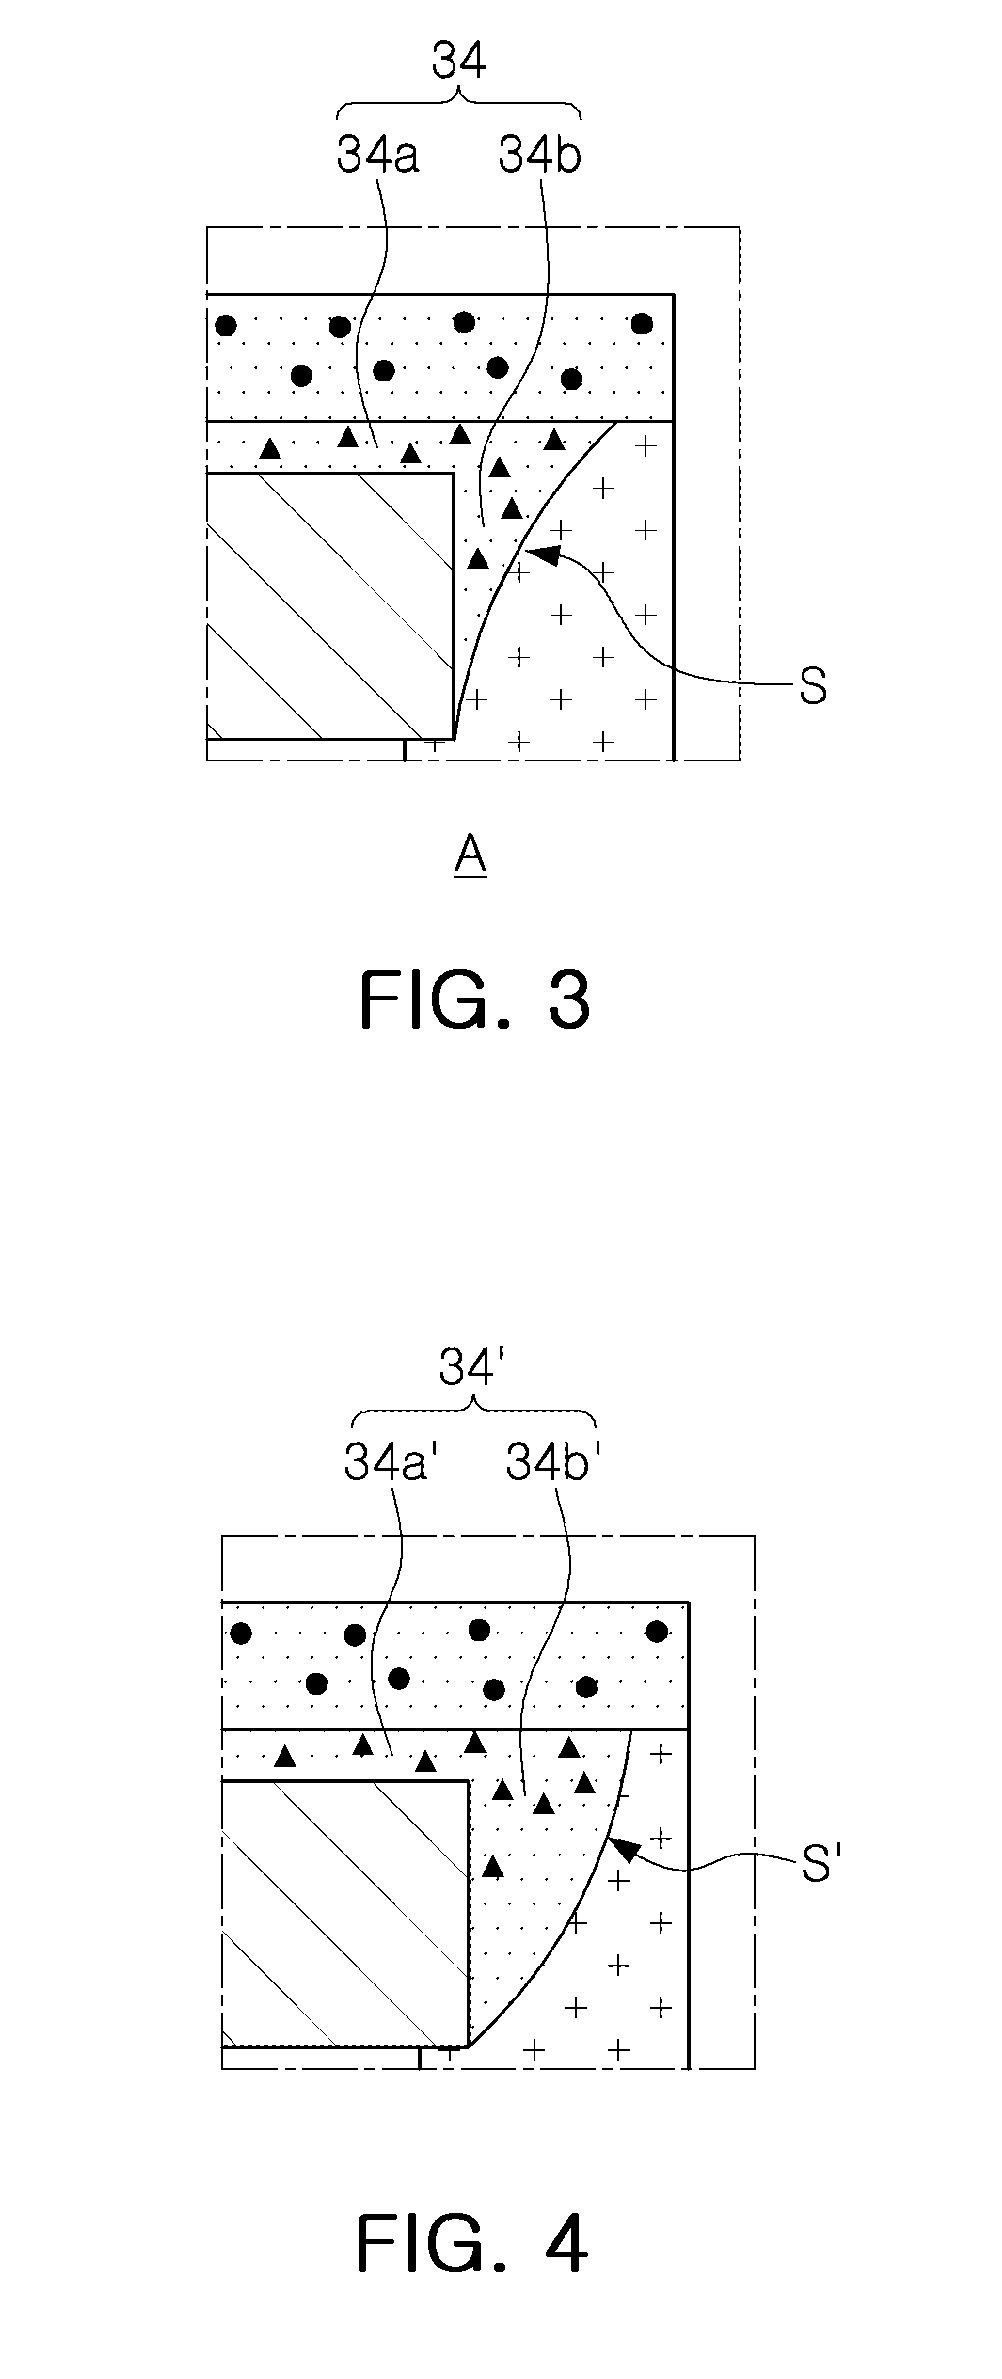 Semiconductor light emitting devices